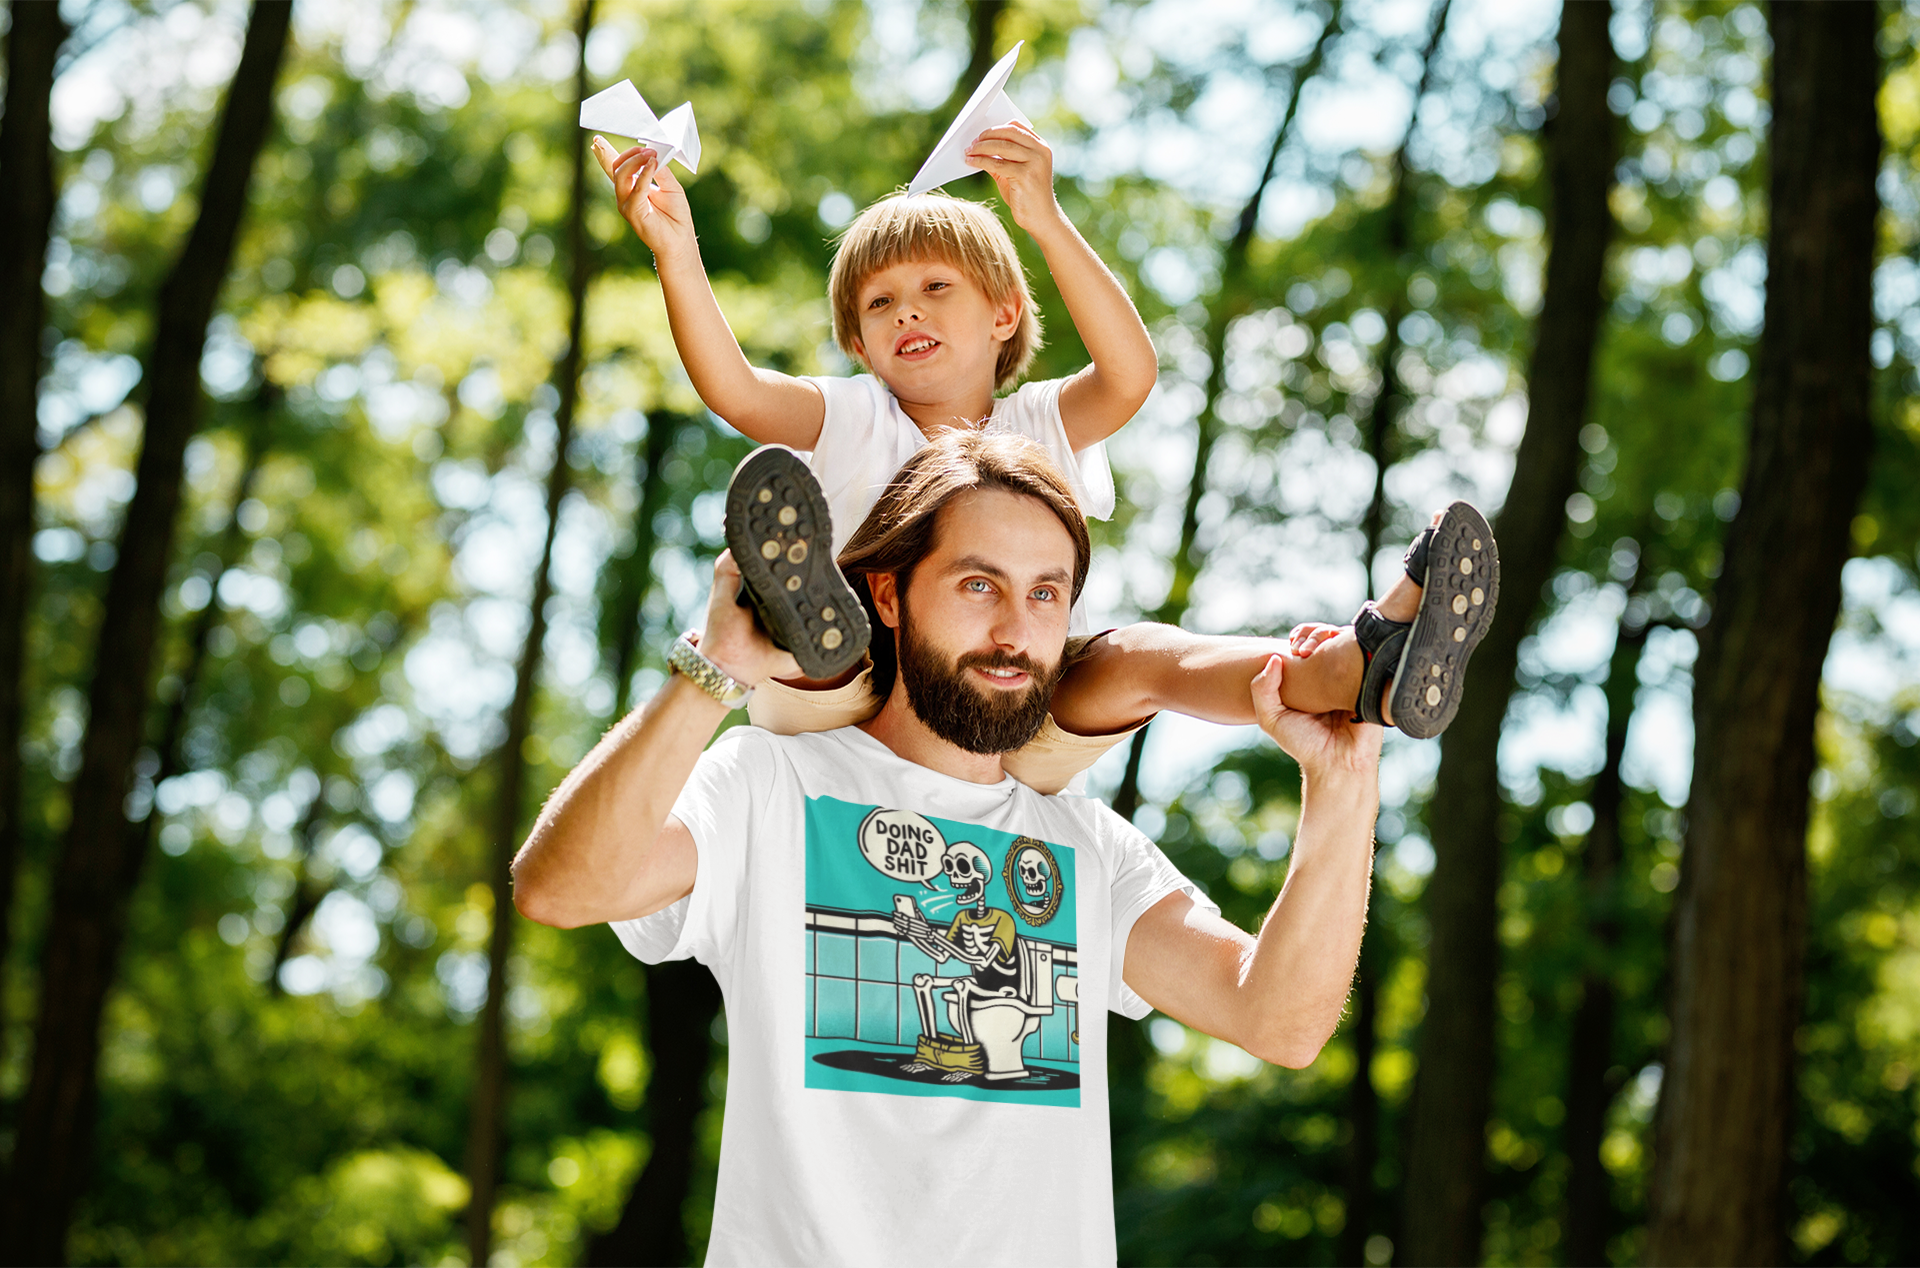 Doing dad shit t-shirt - Father's Day gift